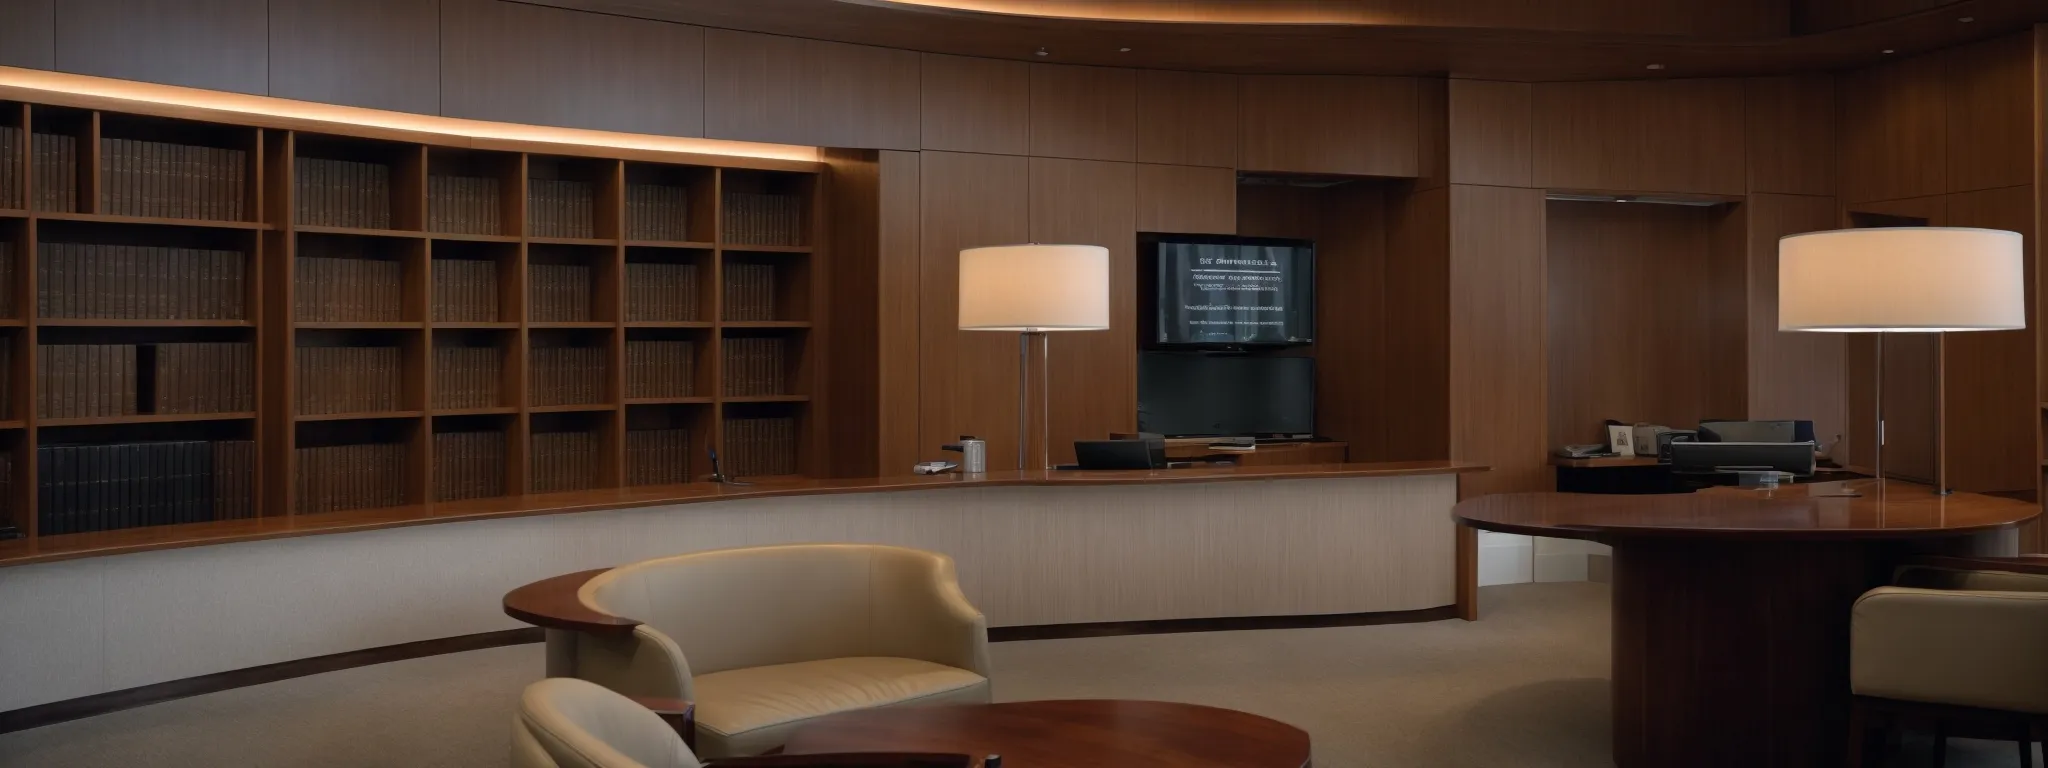 an austere law firm's reception area with a prominently displayed bookshelf filled with legal volumes and an informational screen.